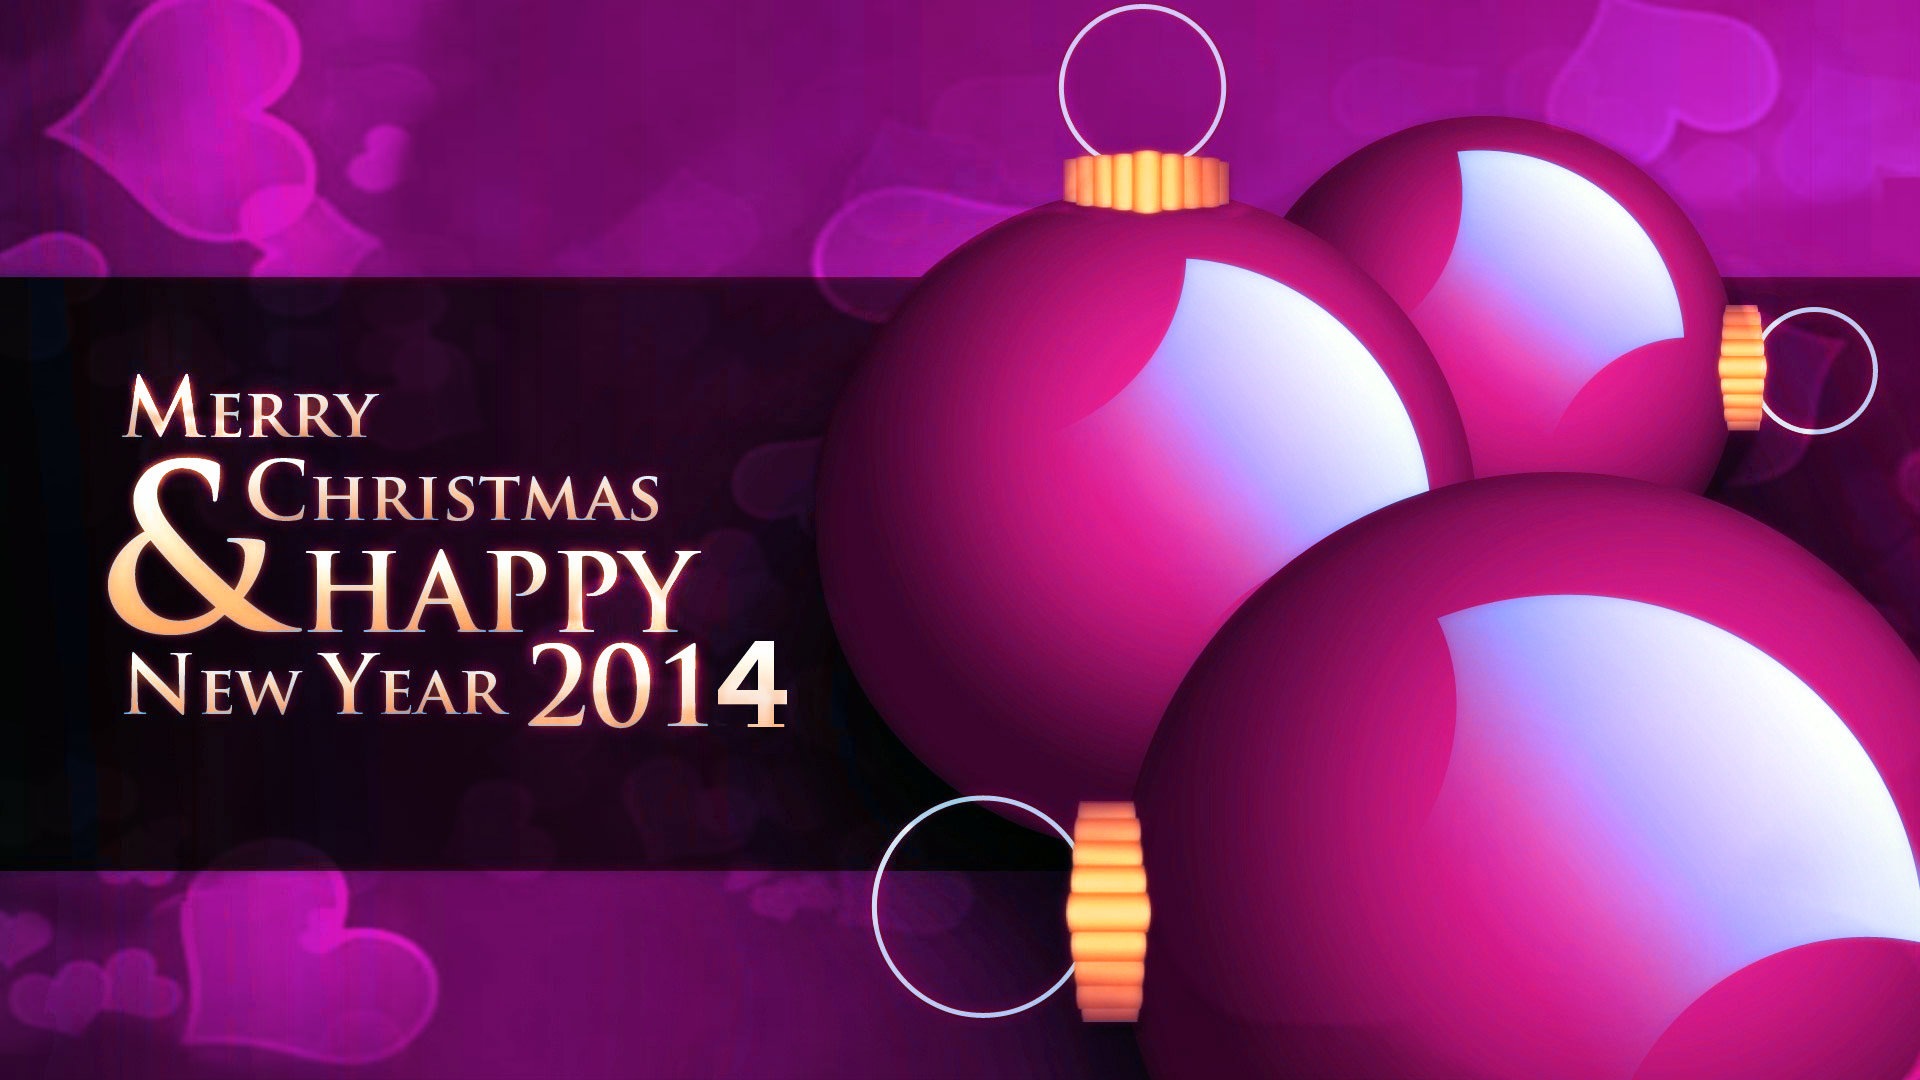 2014 New Year Theme HD Wallpapers (2) #18 - 1920x1080